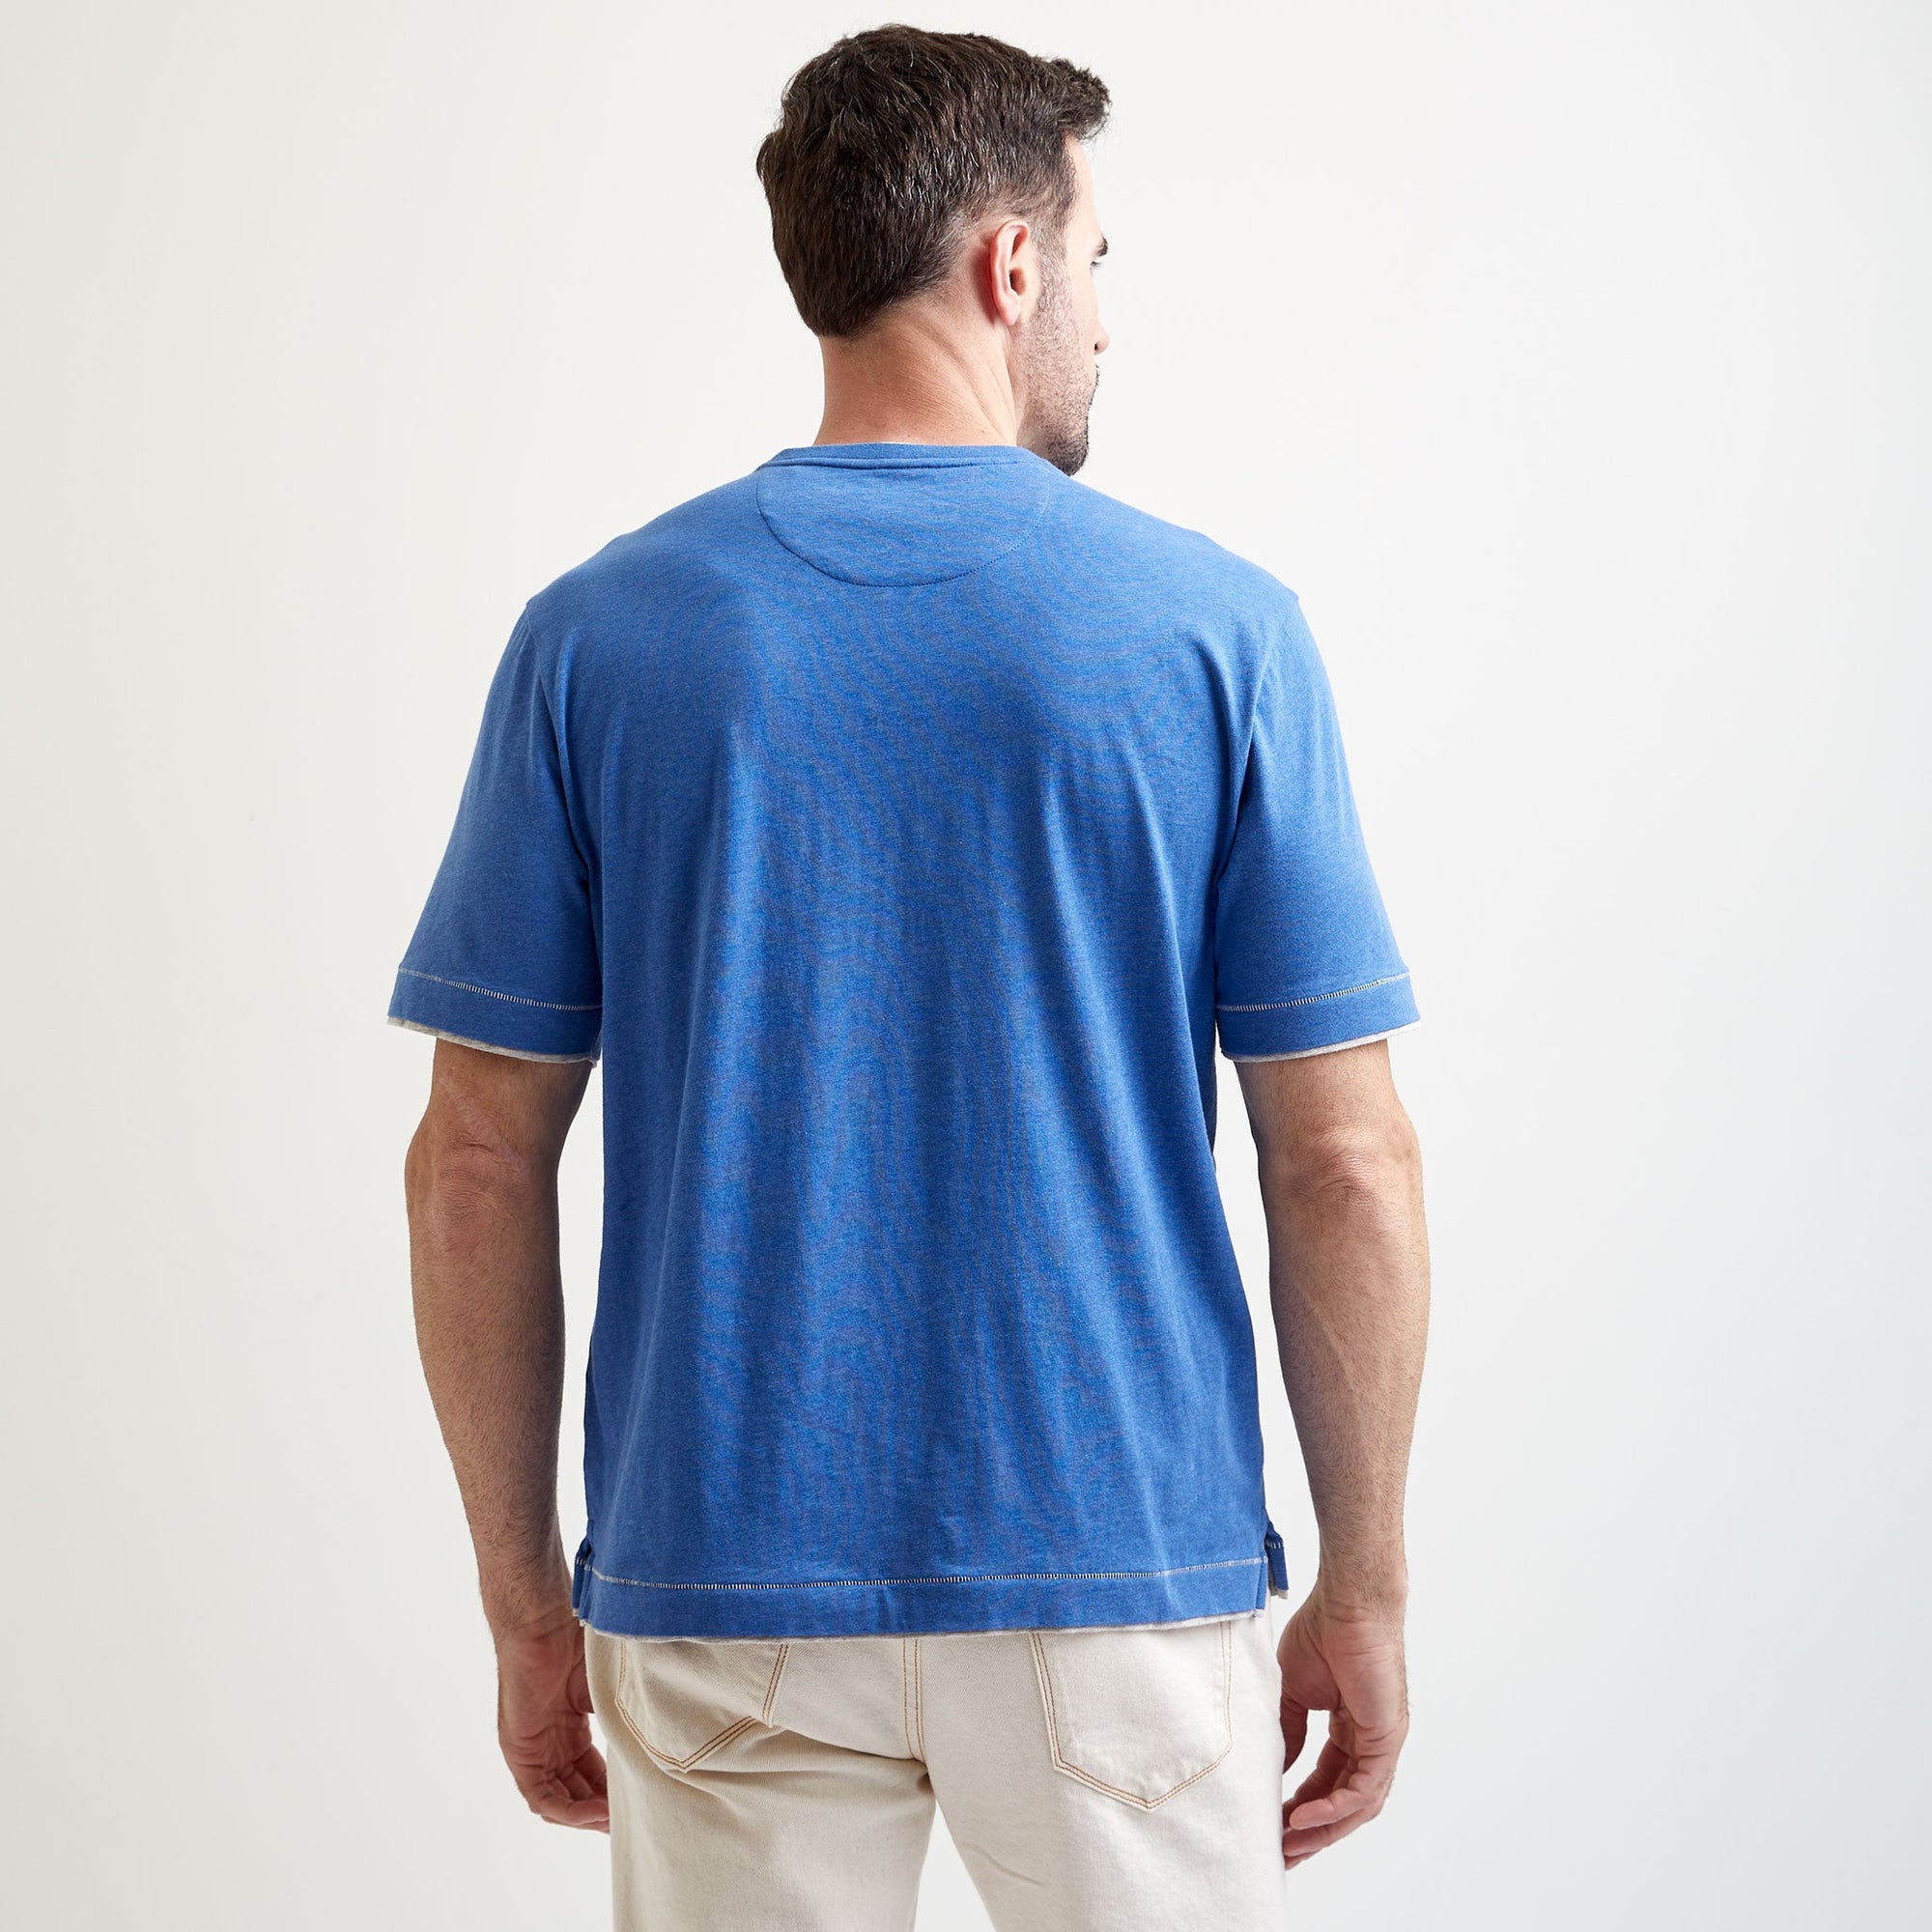 County Line Layered Effect High V-Neck Tee Shirt in Bright Blue Mélange by Left Coast Tee